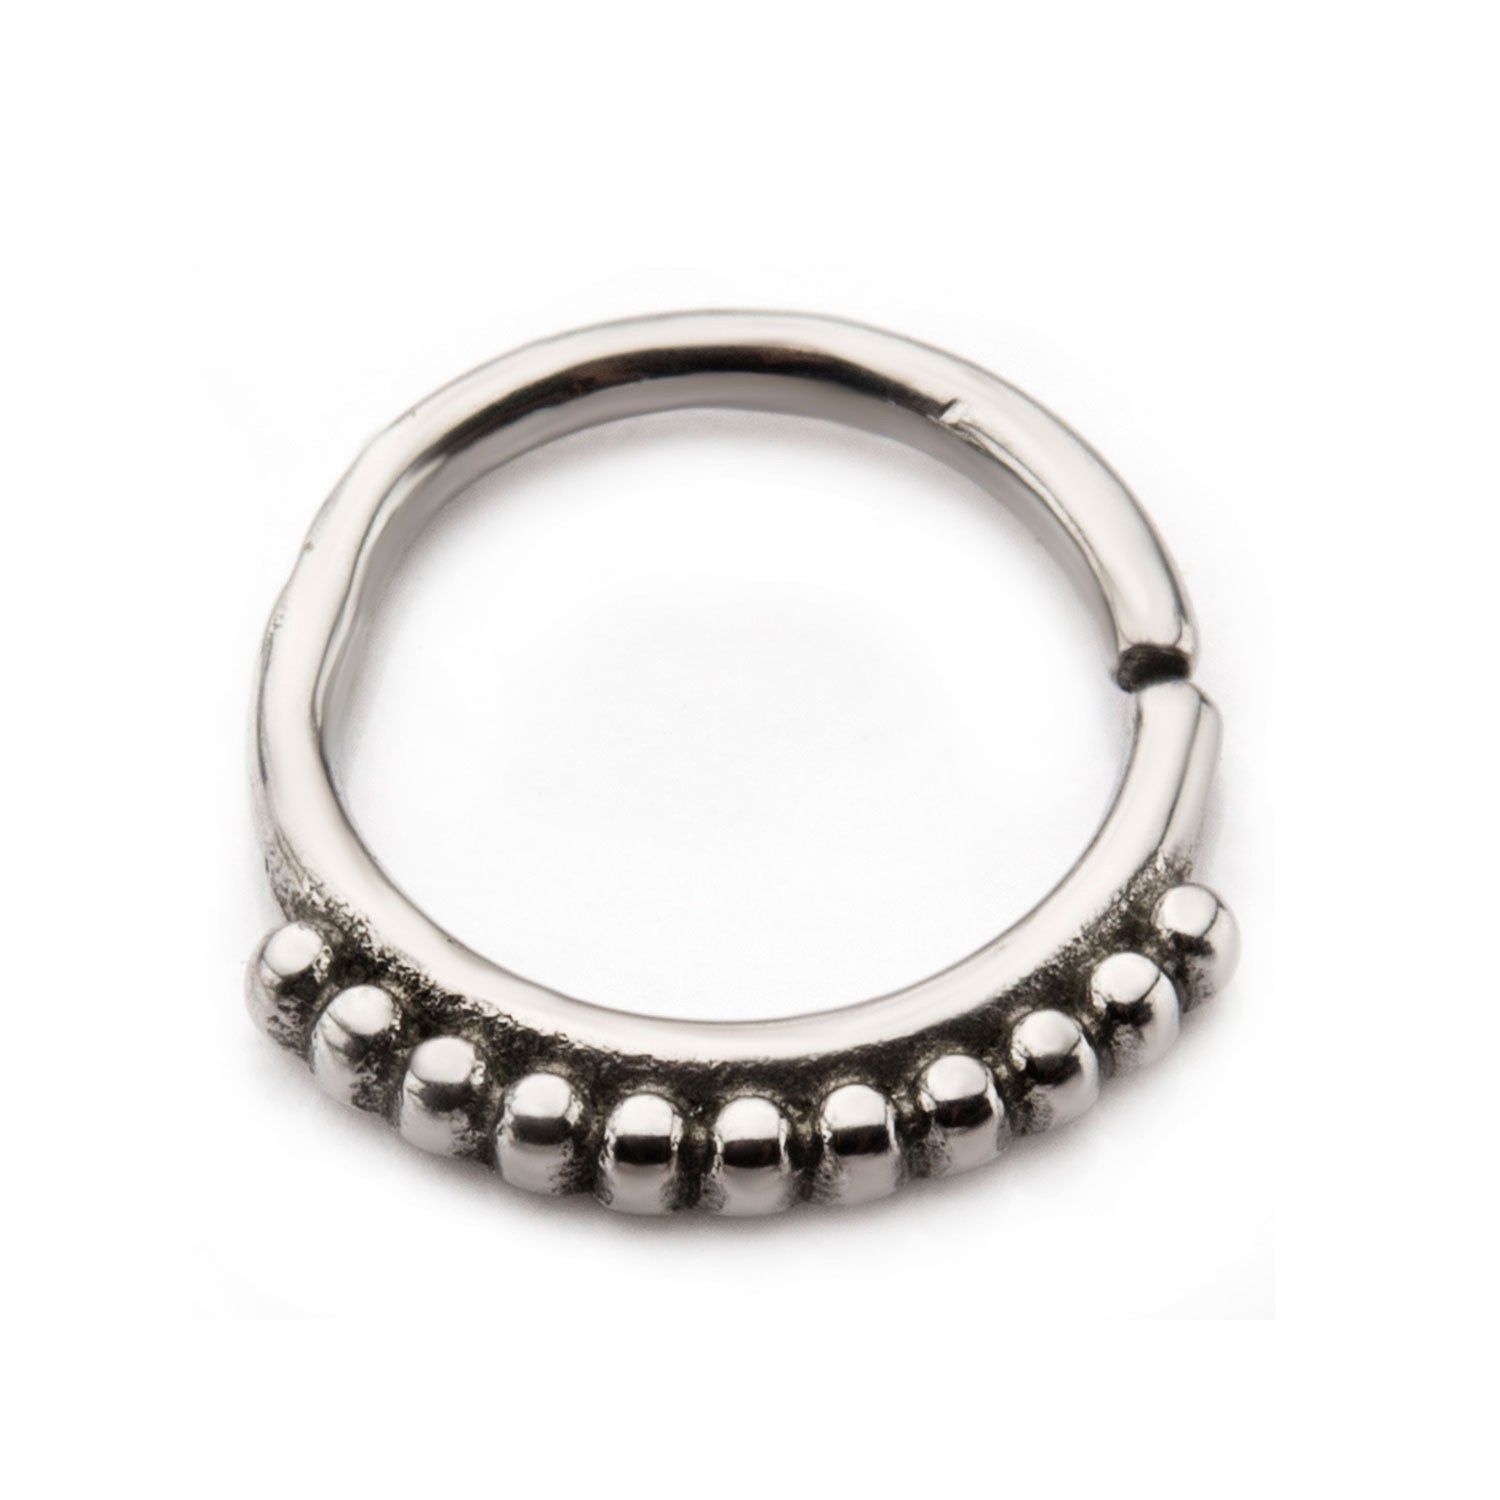 Stainless Shotball Continuous Ring Continuous Rings 16g - 11/32" diameter (9mm) Stainless Steel